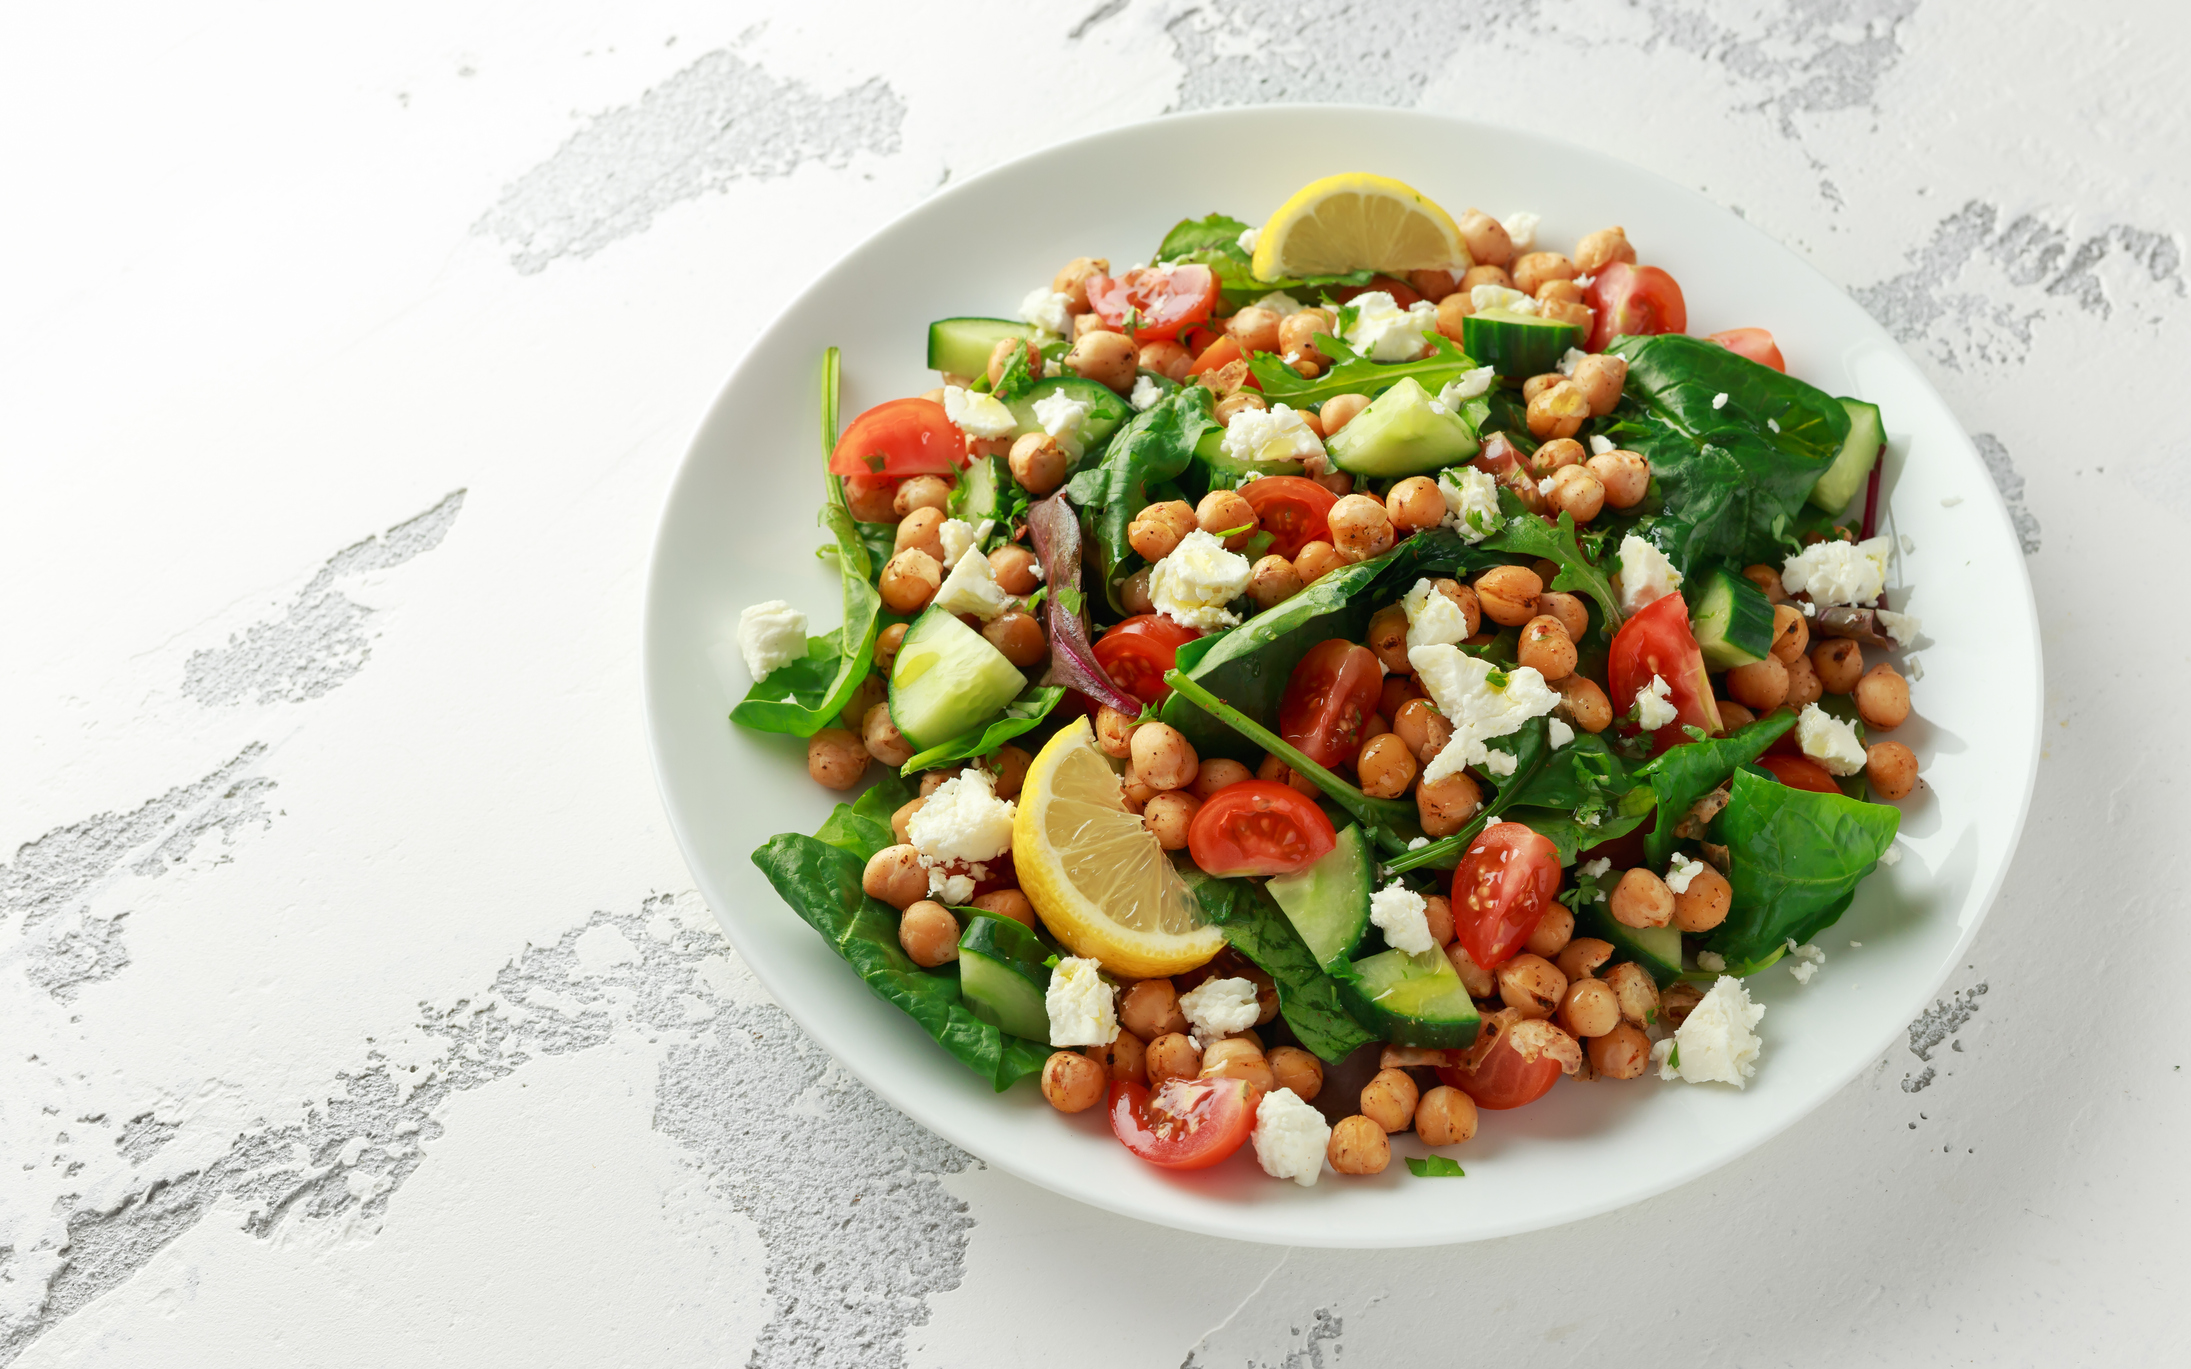 Getty Images - Chickpea Salad